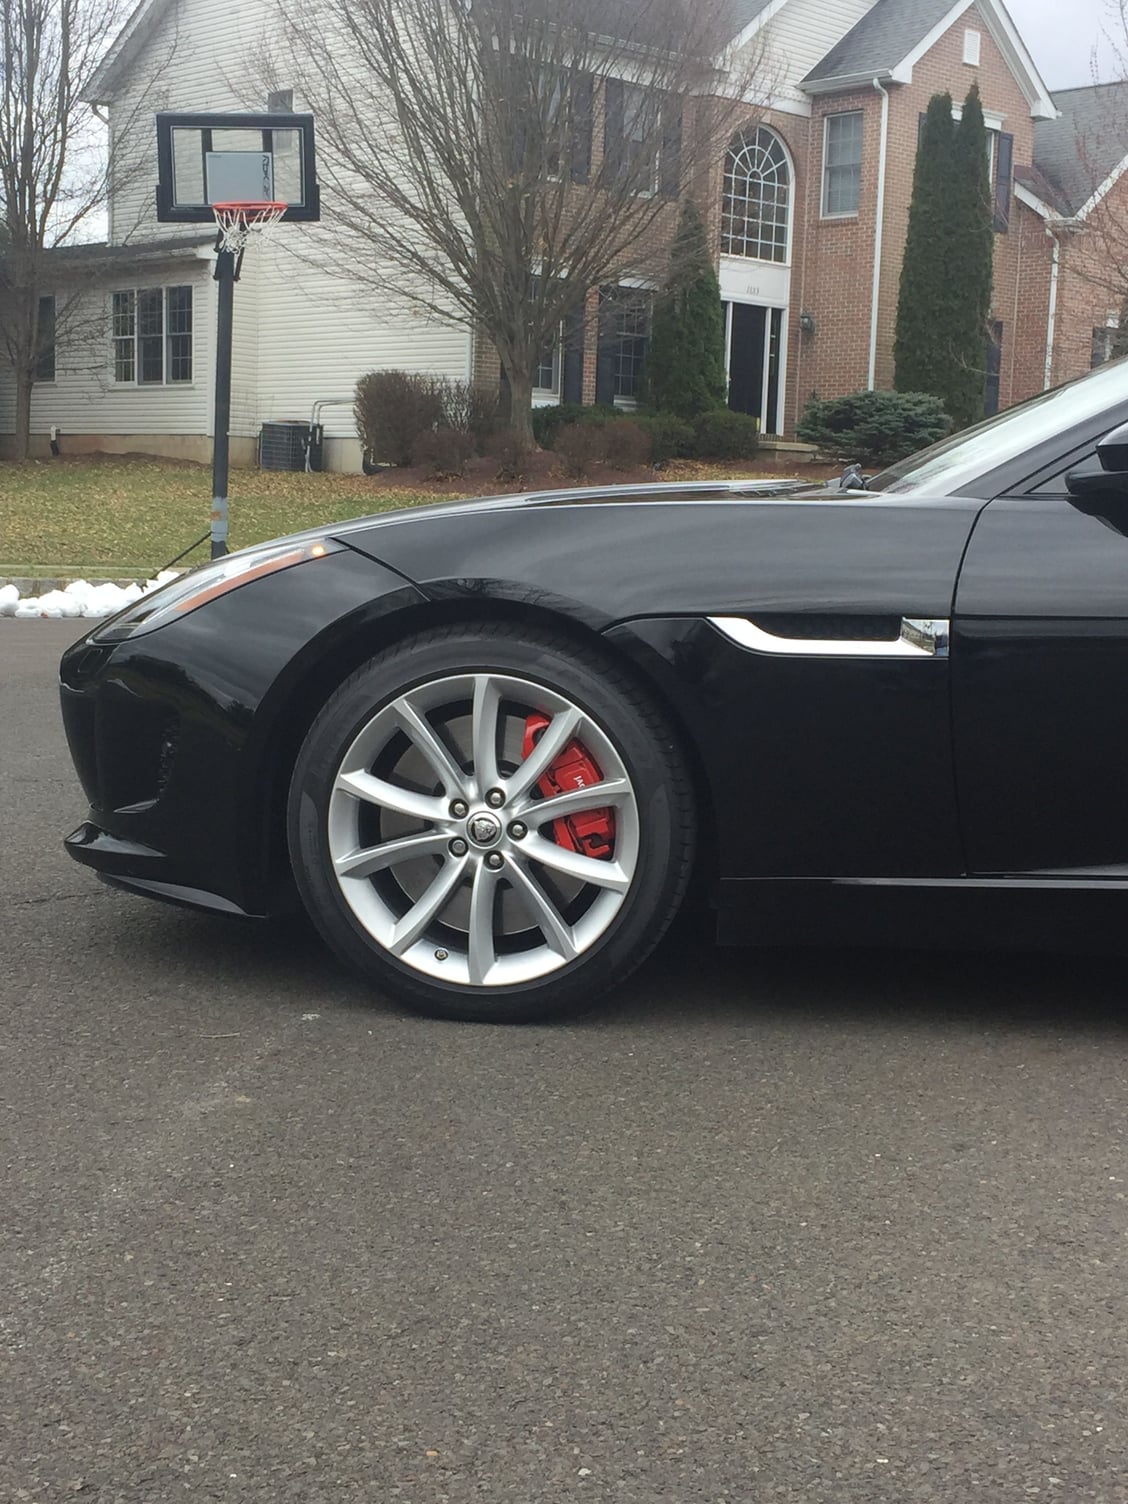 Wheels and Tires/Axles - F Type 19" Propeller Wheels, Stock Tires, and TPMS for Sale - Used - 2014 to 2019 Jaguar F-Type - Jamison, PA 18929, United States